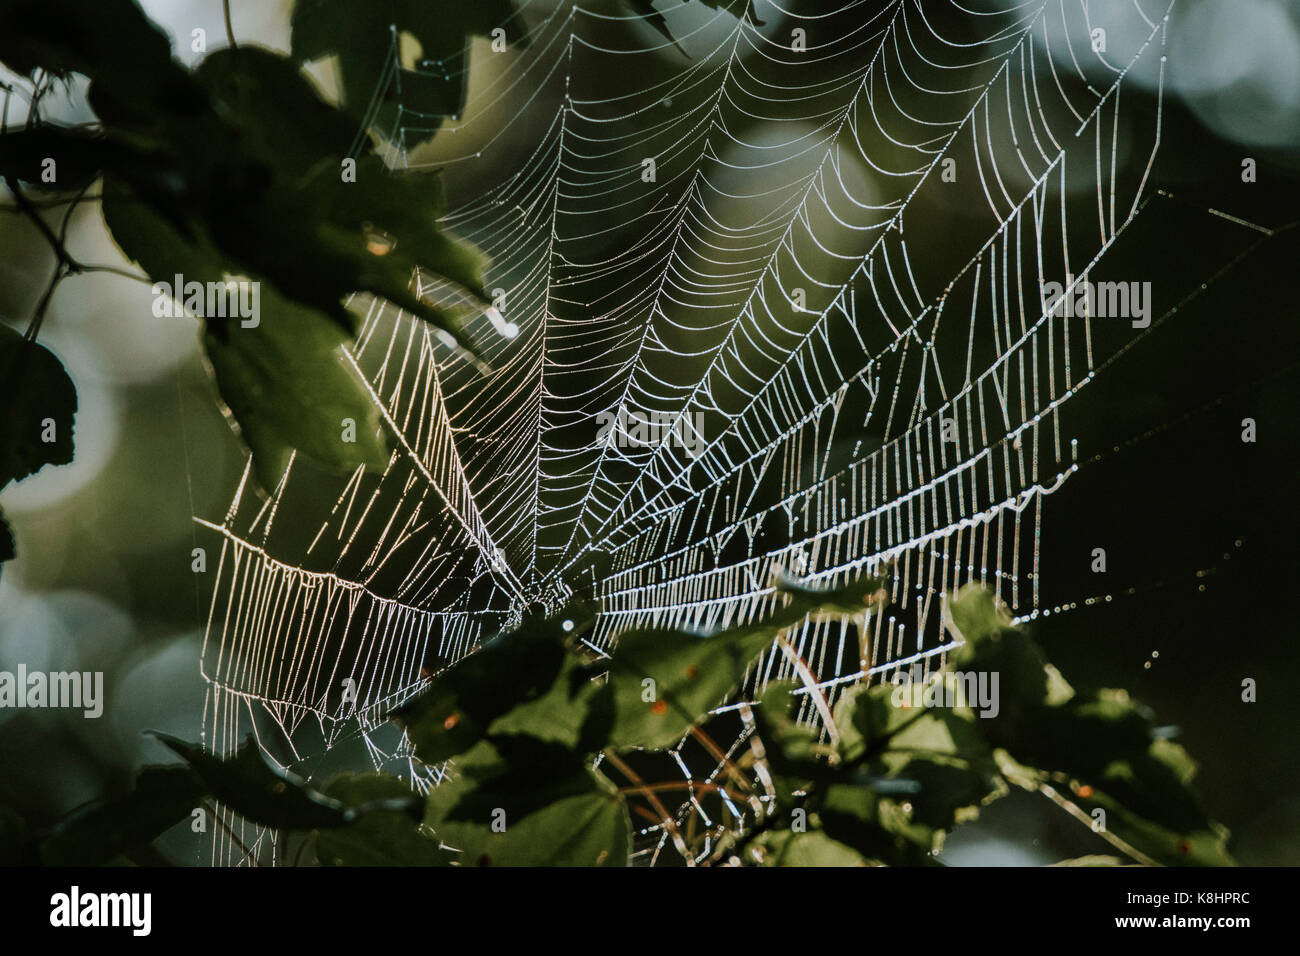 Close-up of spider web on tree in forest Stock Photo